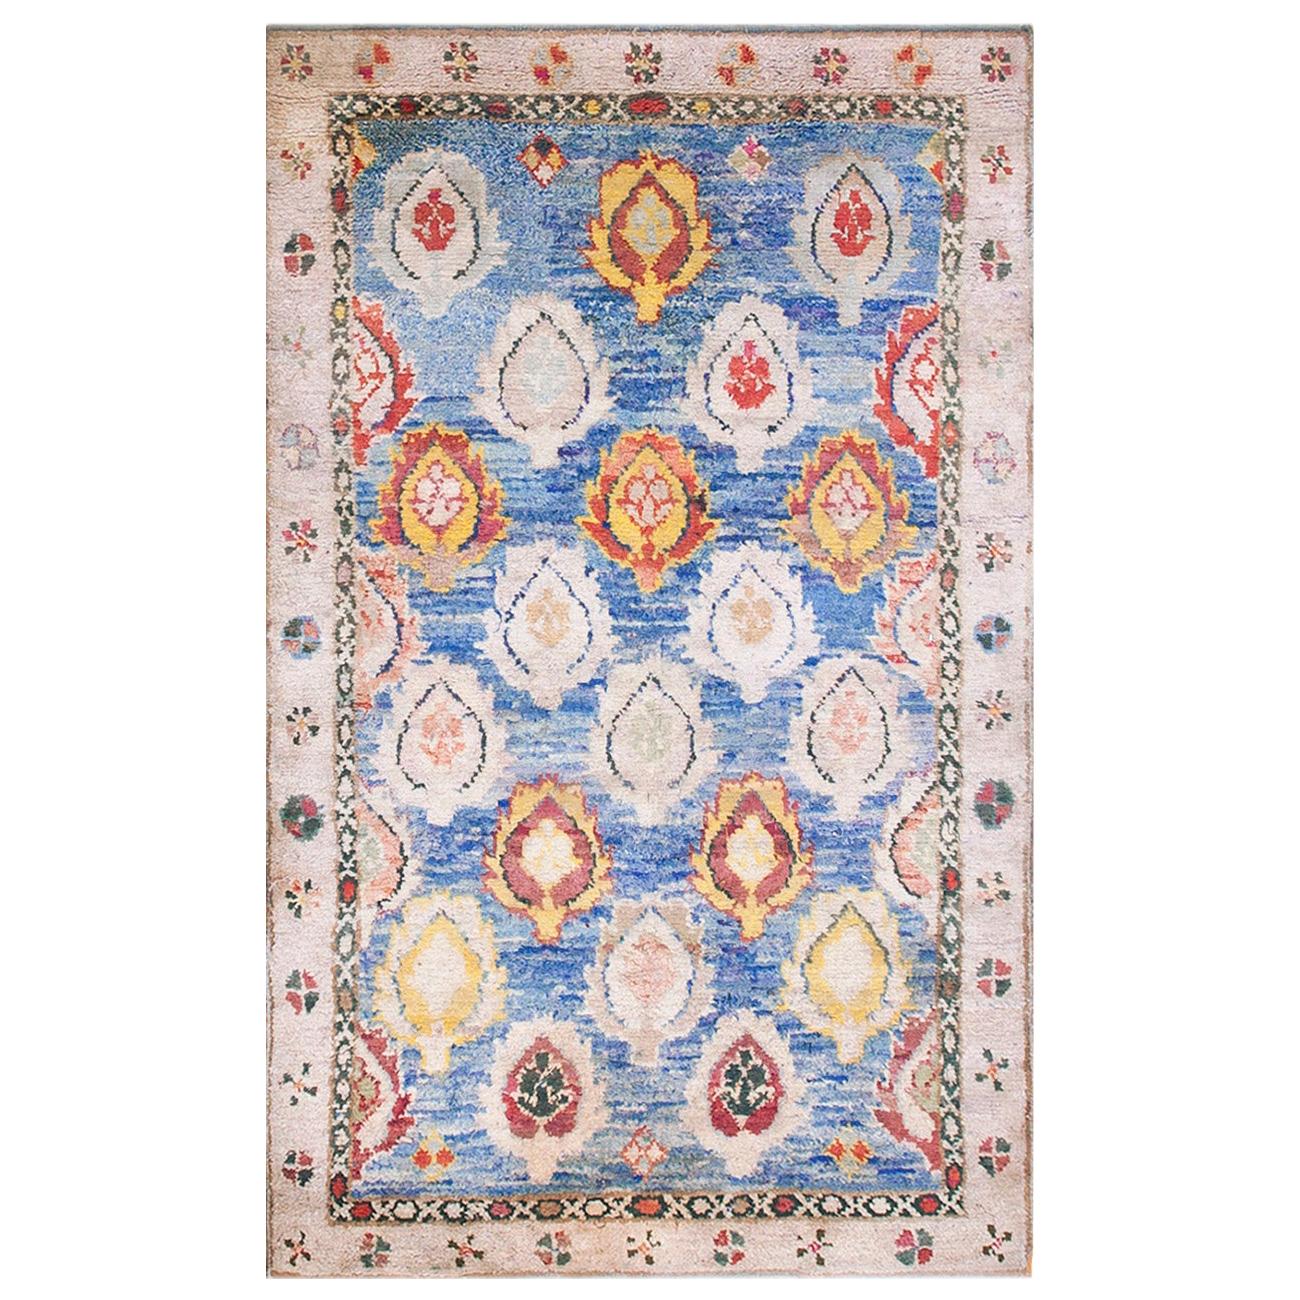 Early 20th Century Cotton Agra Carpet ( 4'2" x 6'9" - 127 x 206 ) For Sale